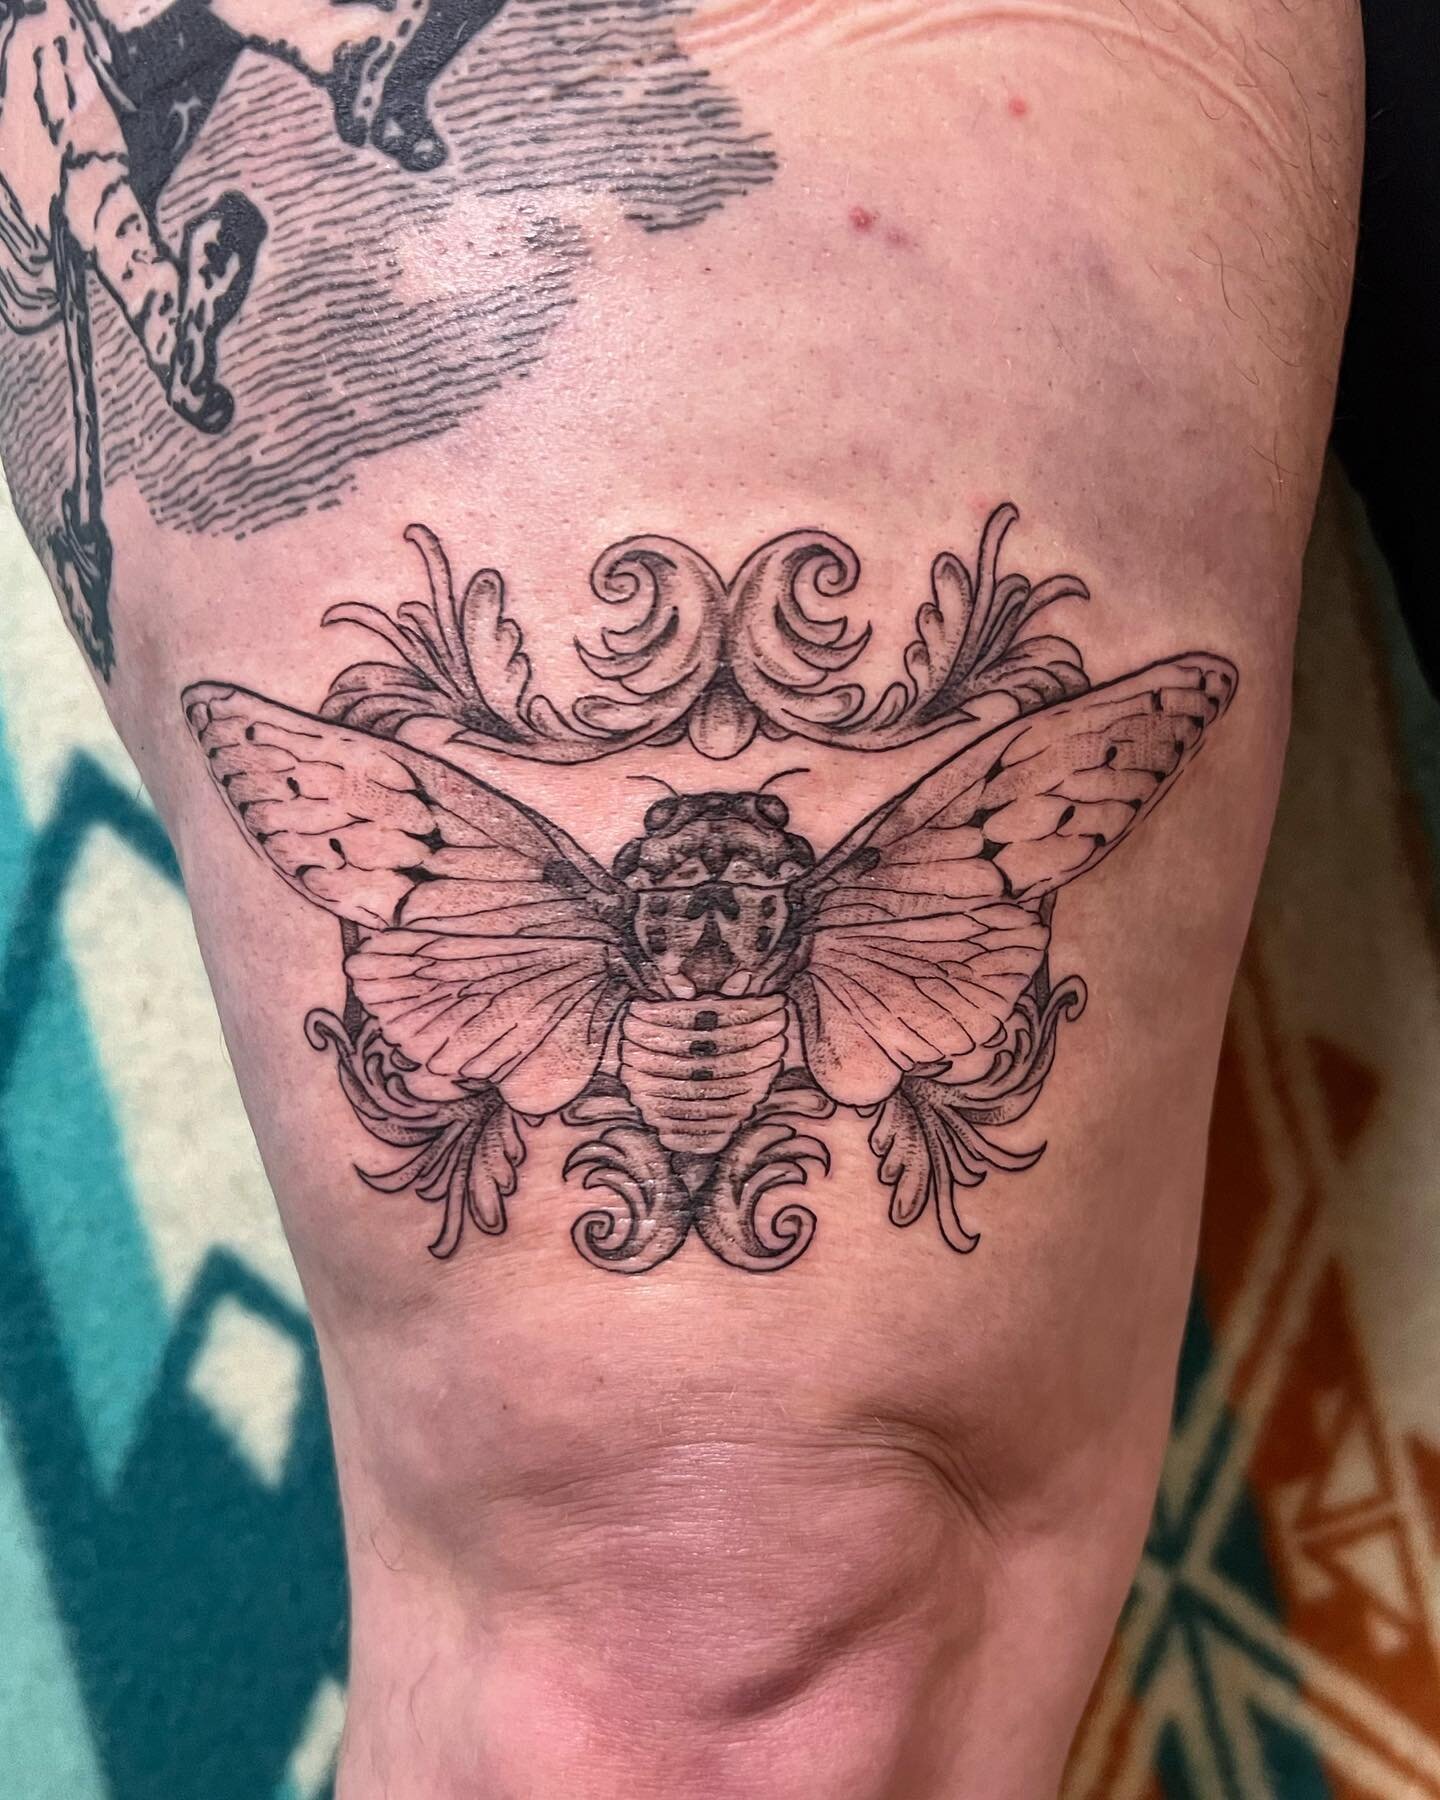 Cicada flash for a rad client 💖 I&rsquo;m so grateful for every person who gets flash from me! Excited to do more bugs 🐞 I&rsquo;m definitely going to keep posting flash  when my books open up, and then next round I won&rsquo;t be drawing them the 